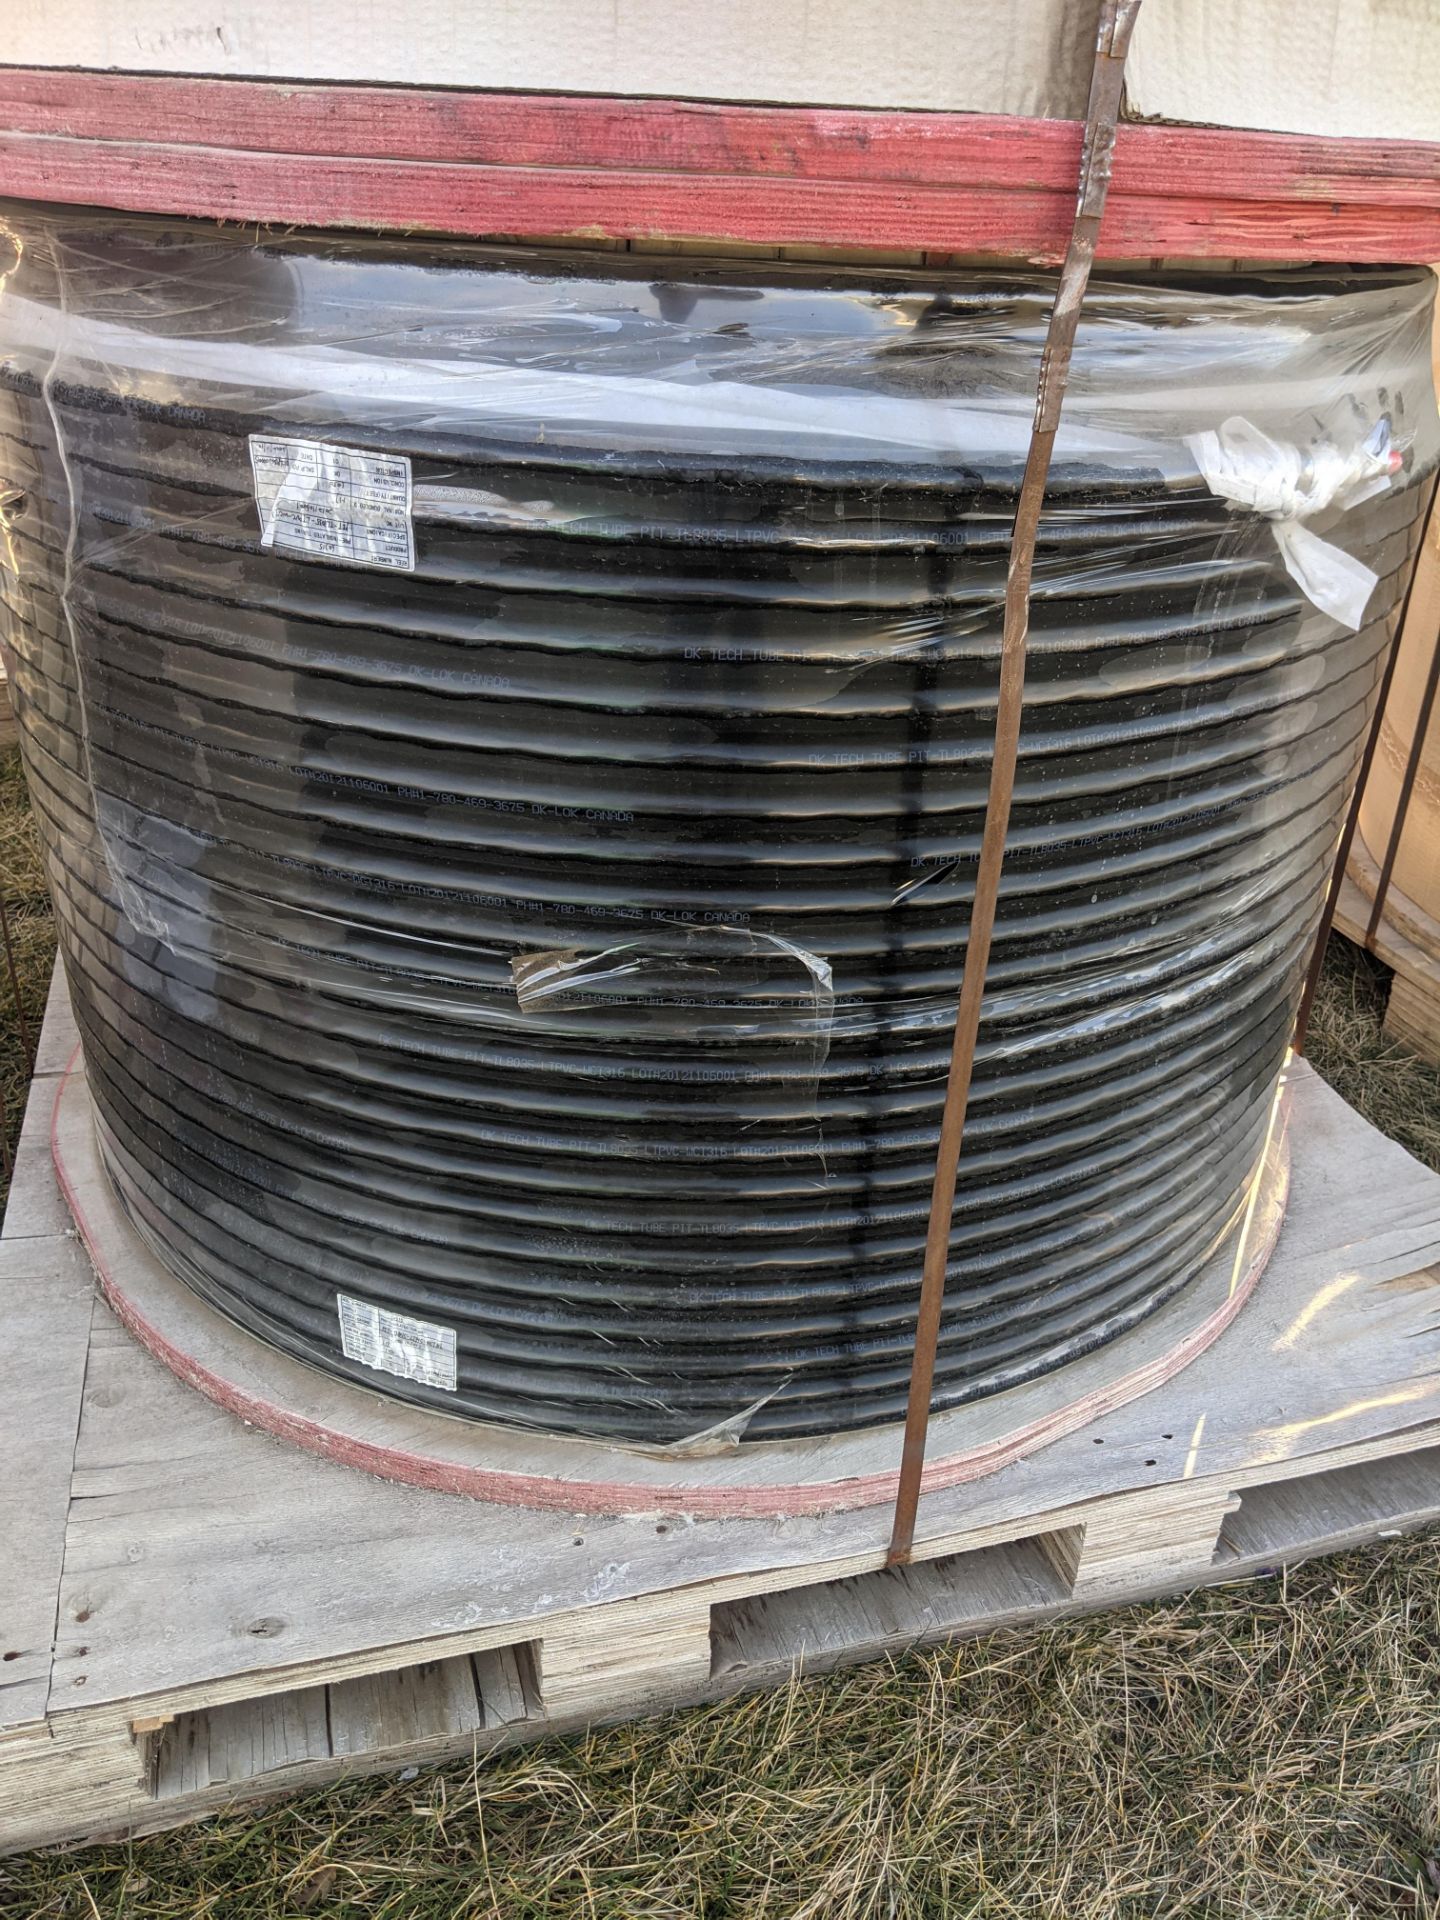 PRE-INSULATED COIL TUBING SS, 2100FT PER SKID, PIT-TL8035-LTPVC-WCT316-: 1/2" X .0345-WELDED-316